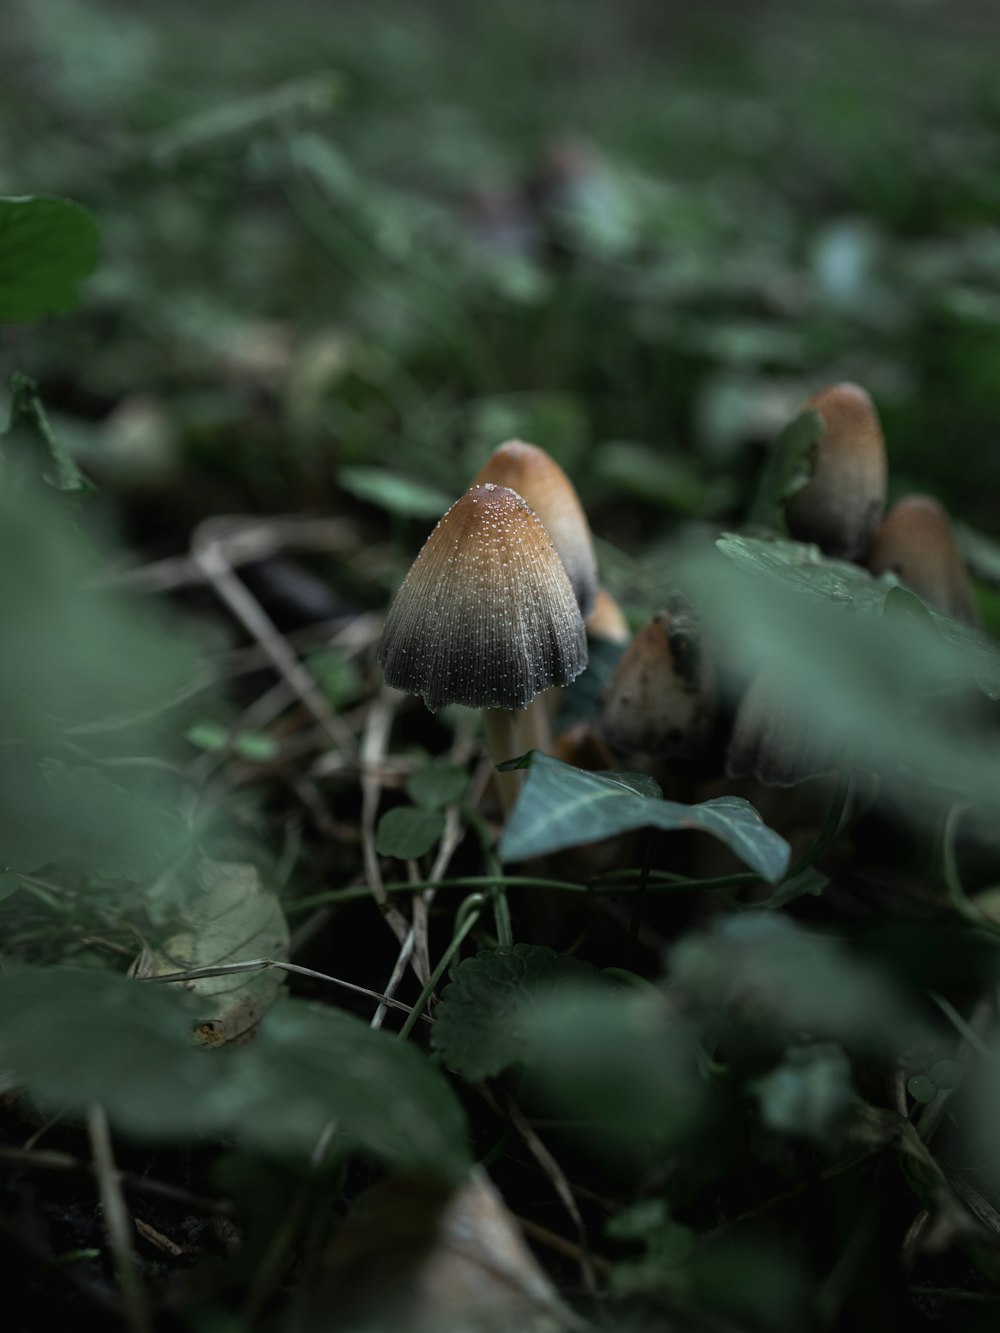 a close up of mushrooms growing on a plant